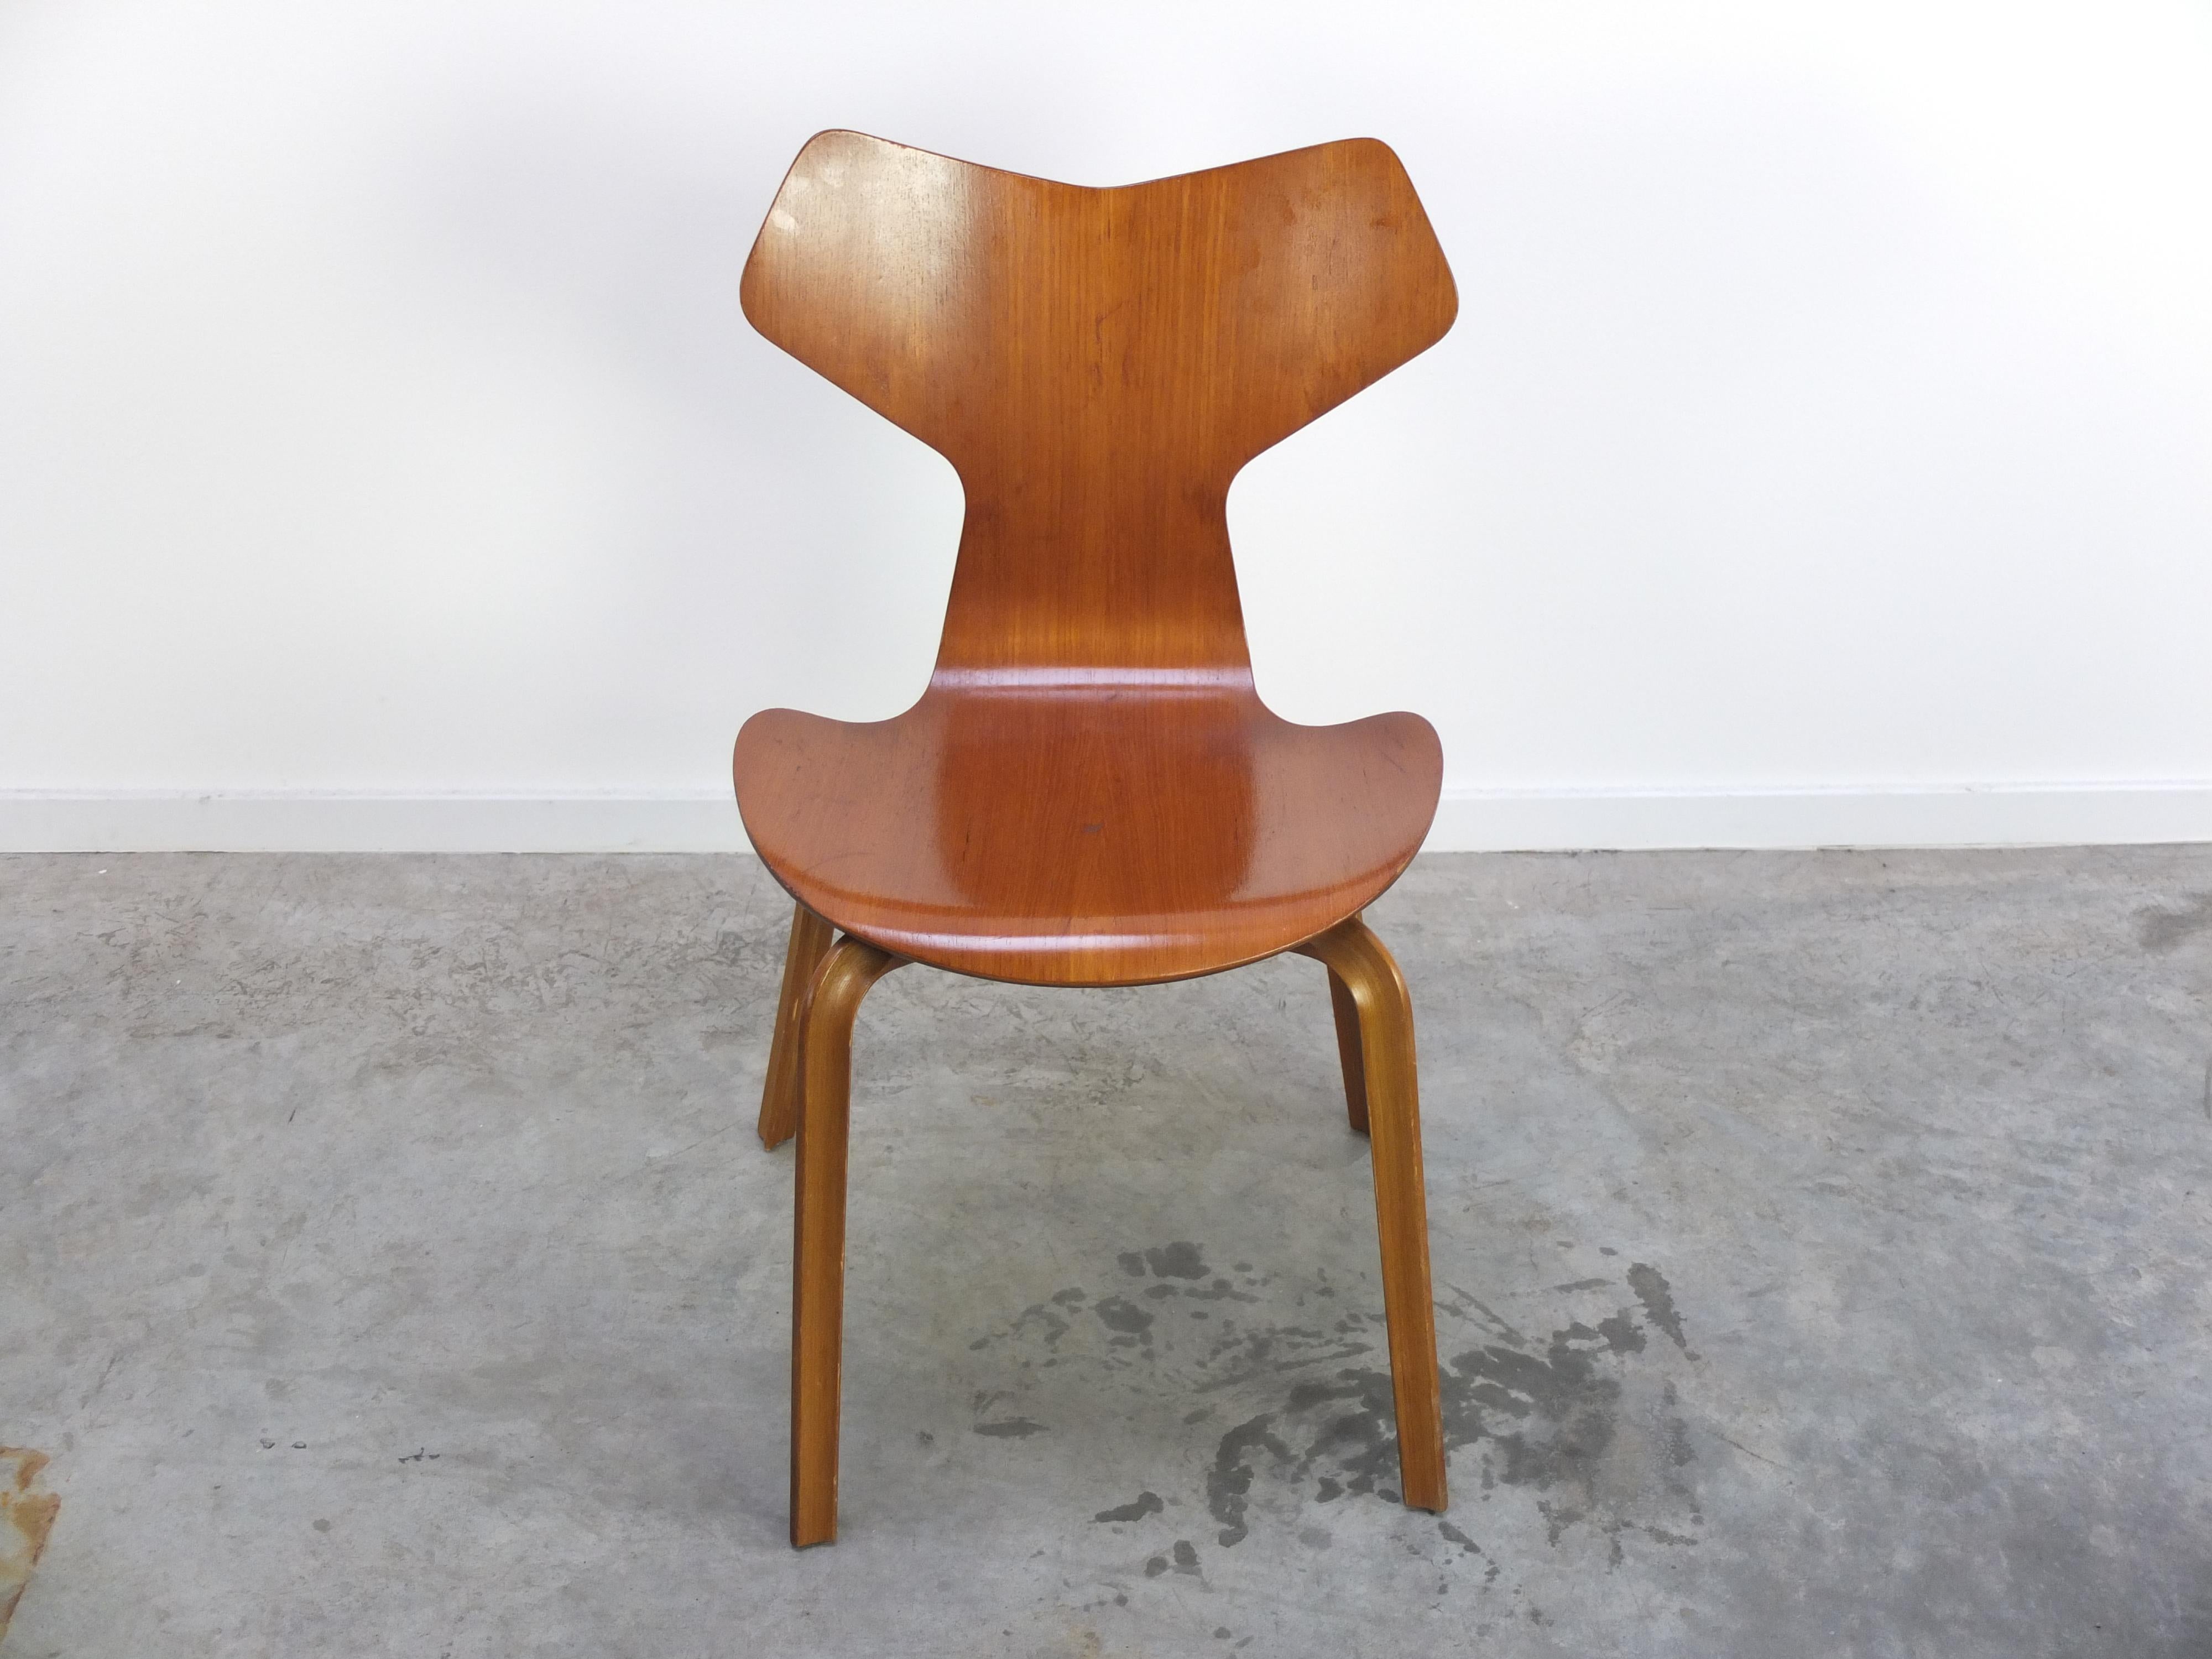 20th Century Rare Set of 4 'Grand Prix' Dining Chairs by Arne Jacobsen for Fritz Hansen, 1957